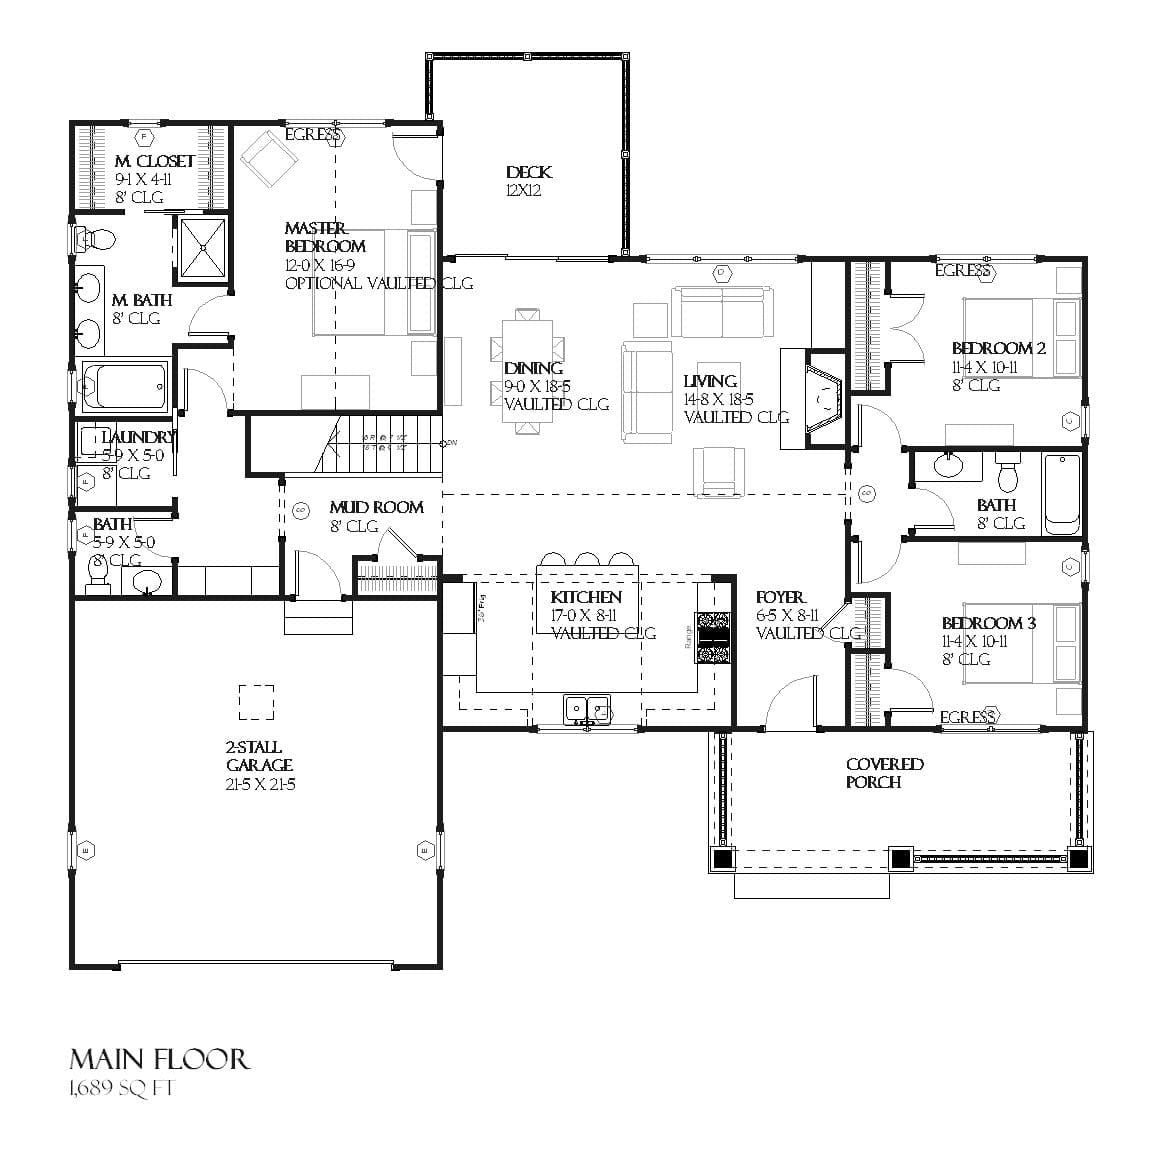 Kehoe - Home Design and Floor Plan - SketchPad House Plans